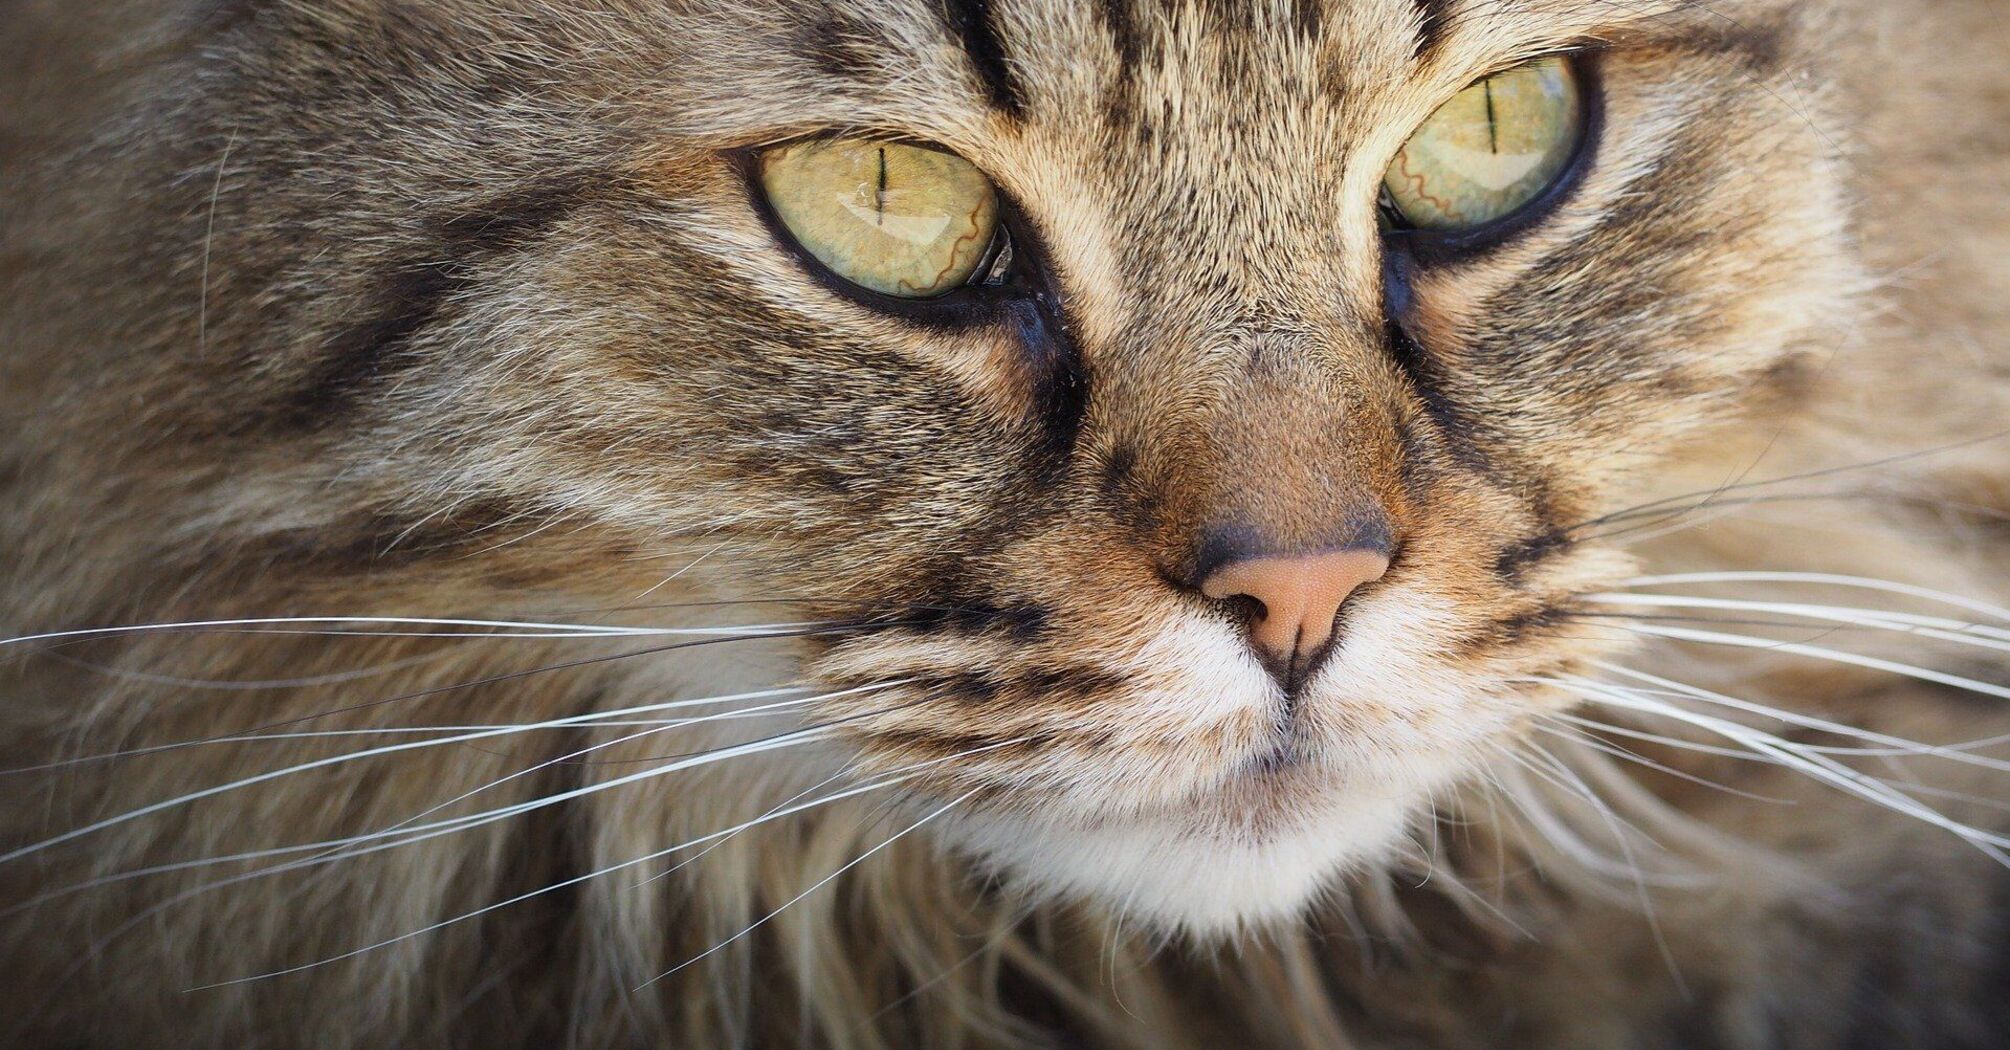 Why cats need whiskers and whether they can be trimmed